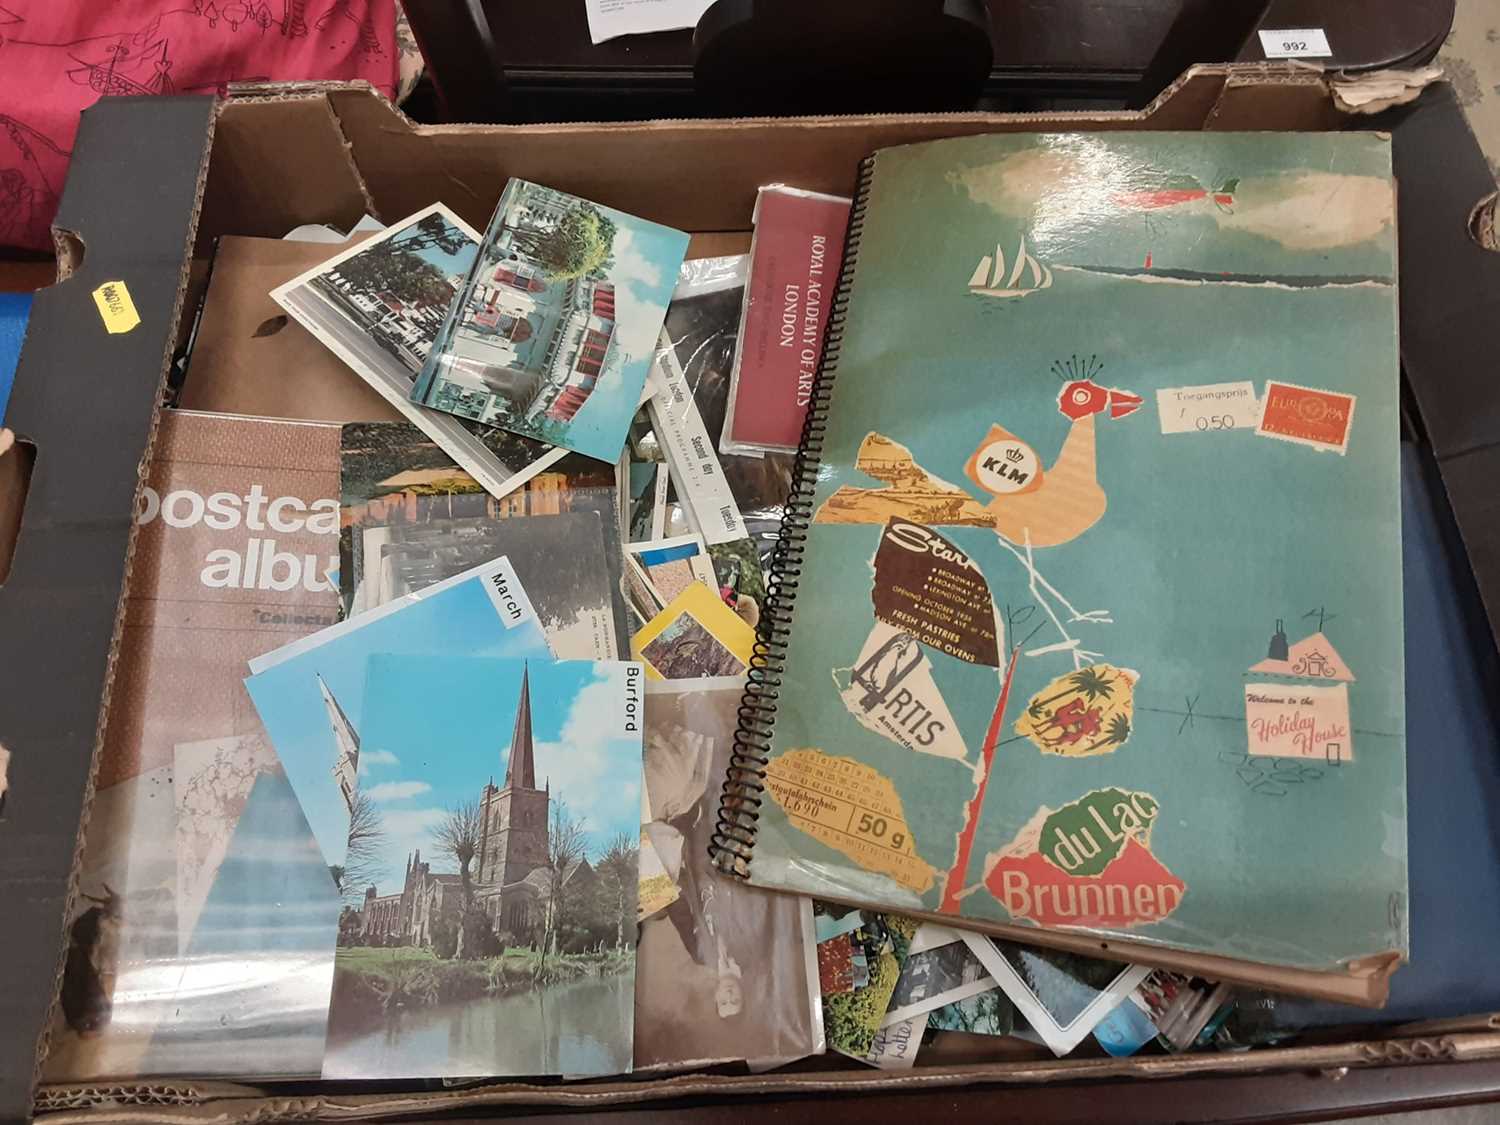 Lot 291 - Box of Postcard albums and loose postcards